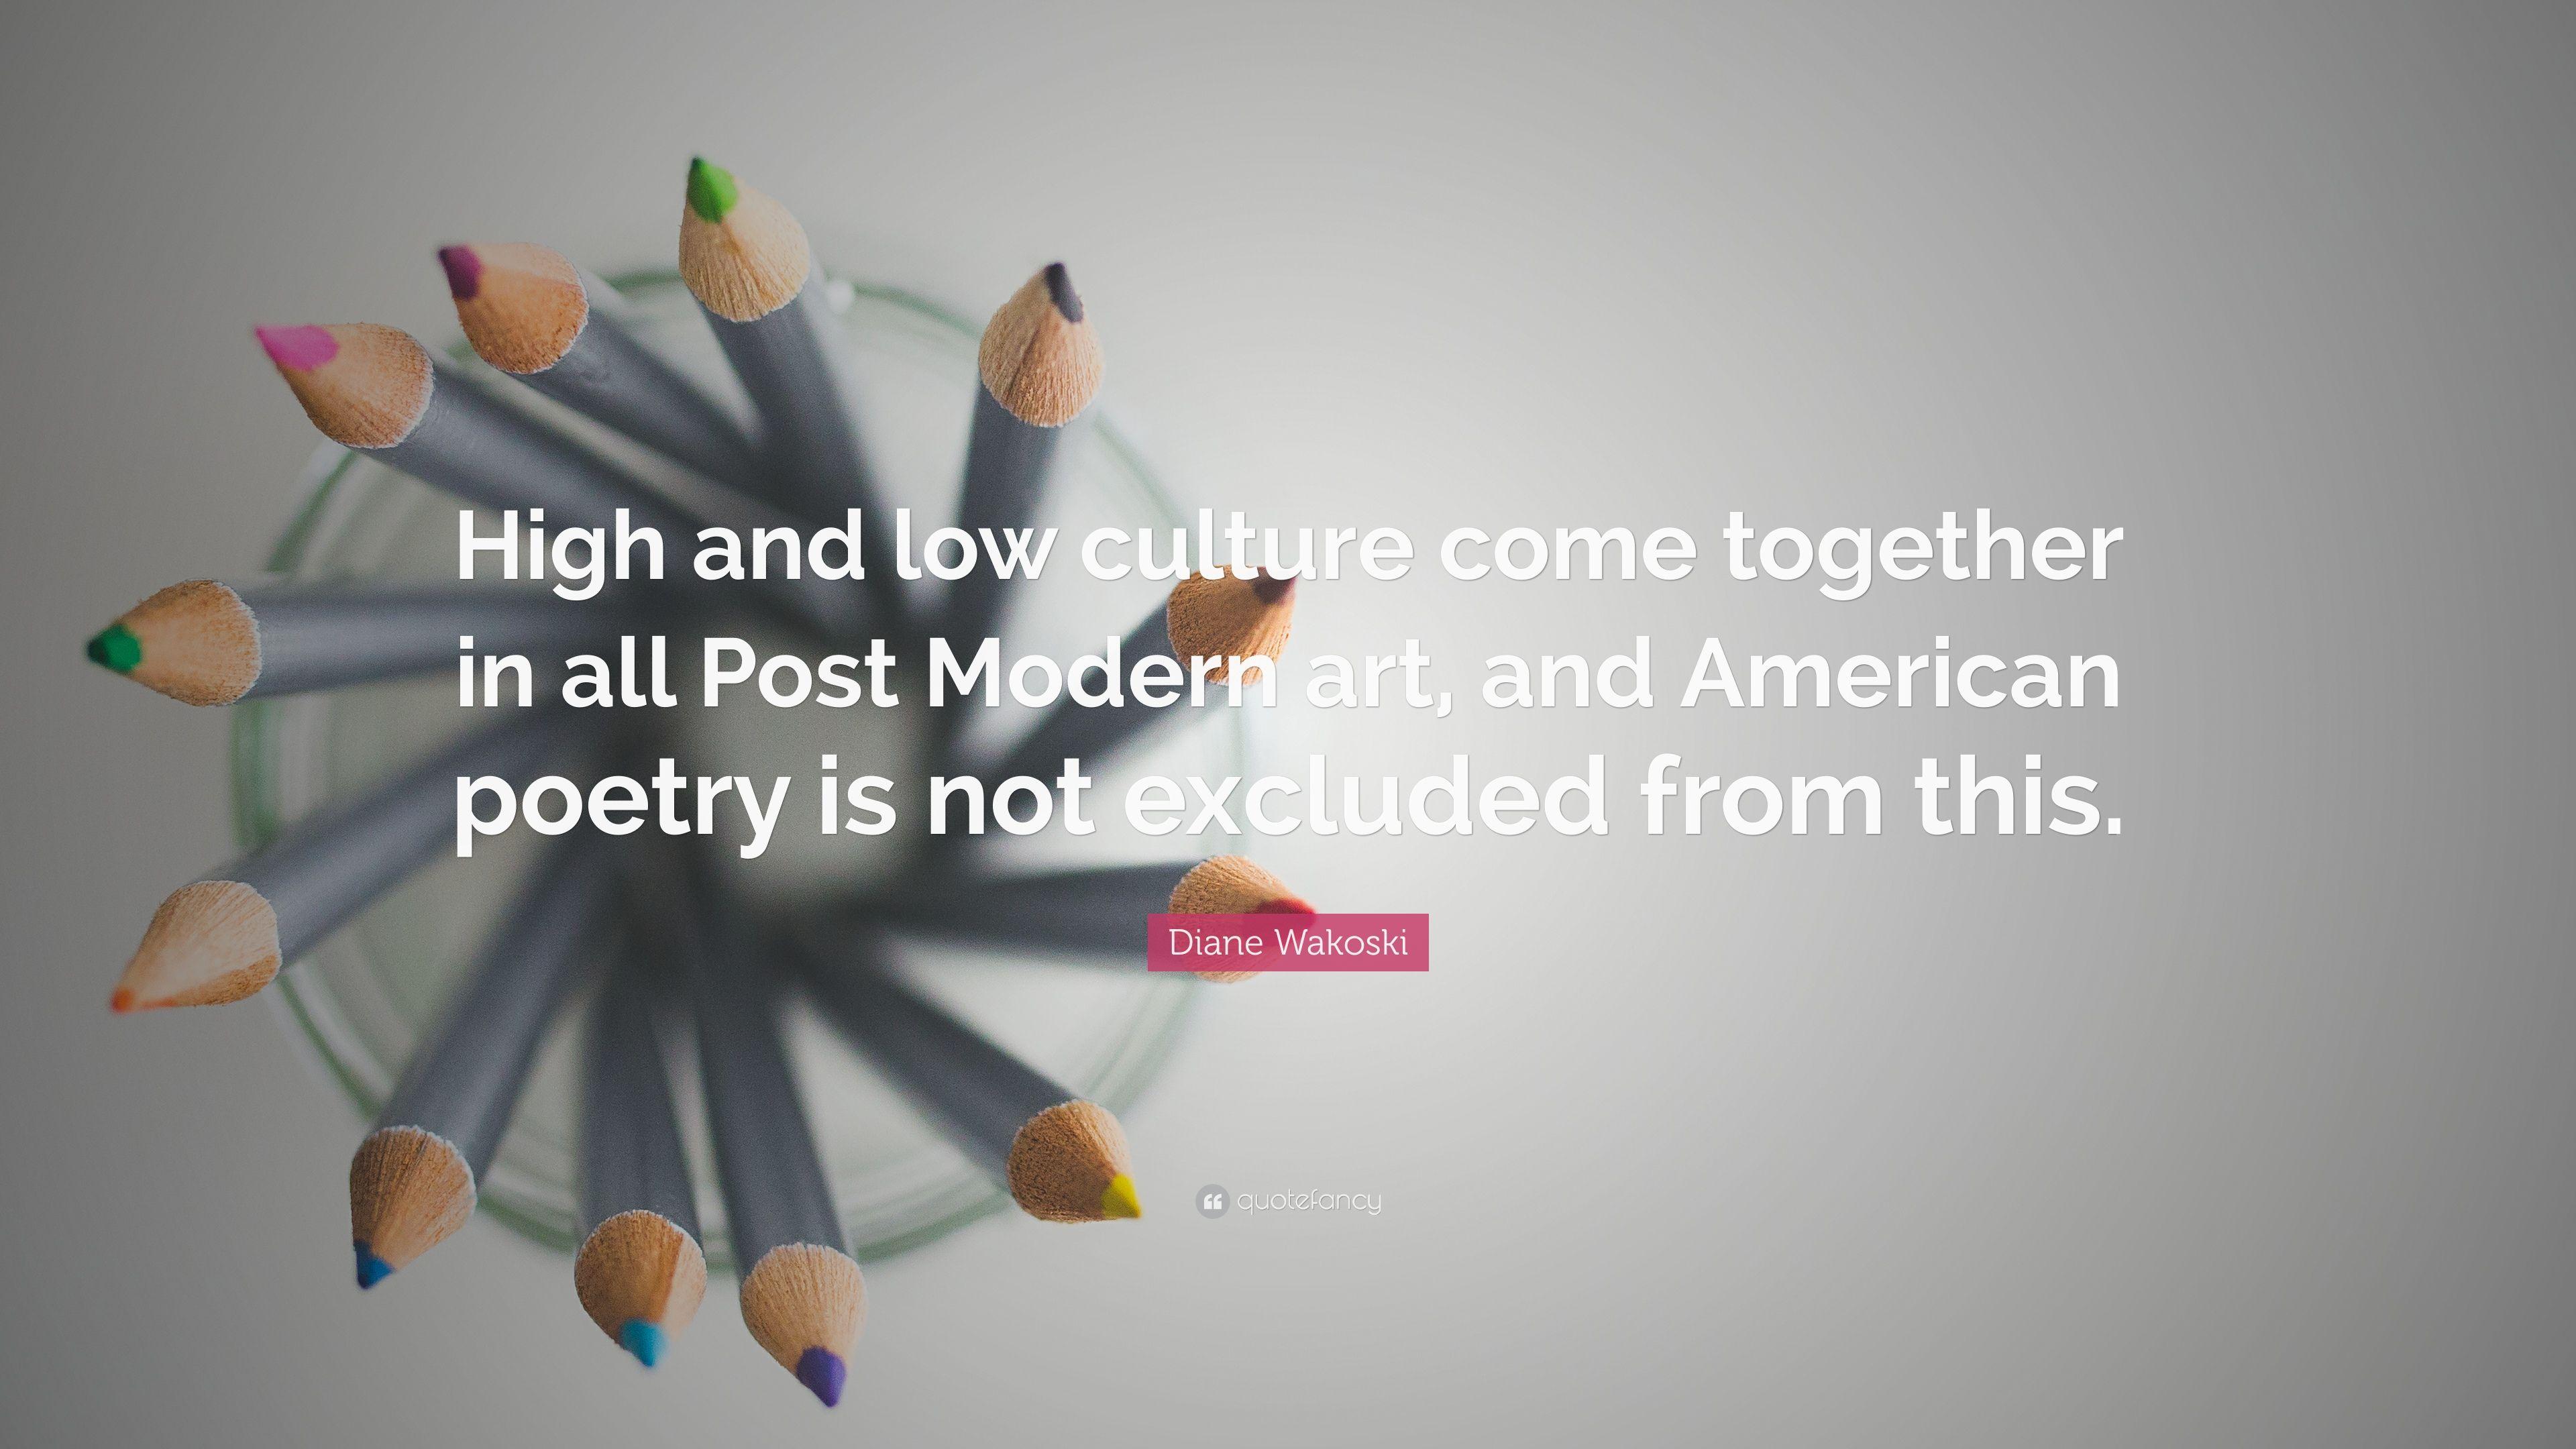 Diane Wakoski Quote: “High and low culture come together in all Post